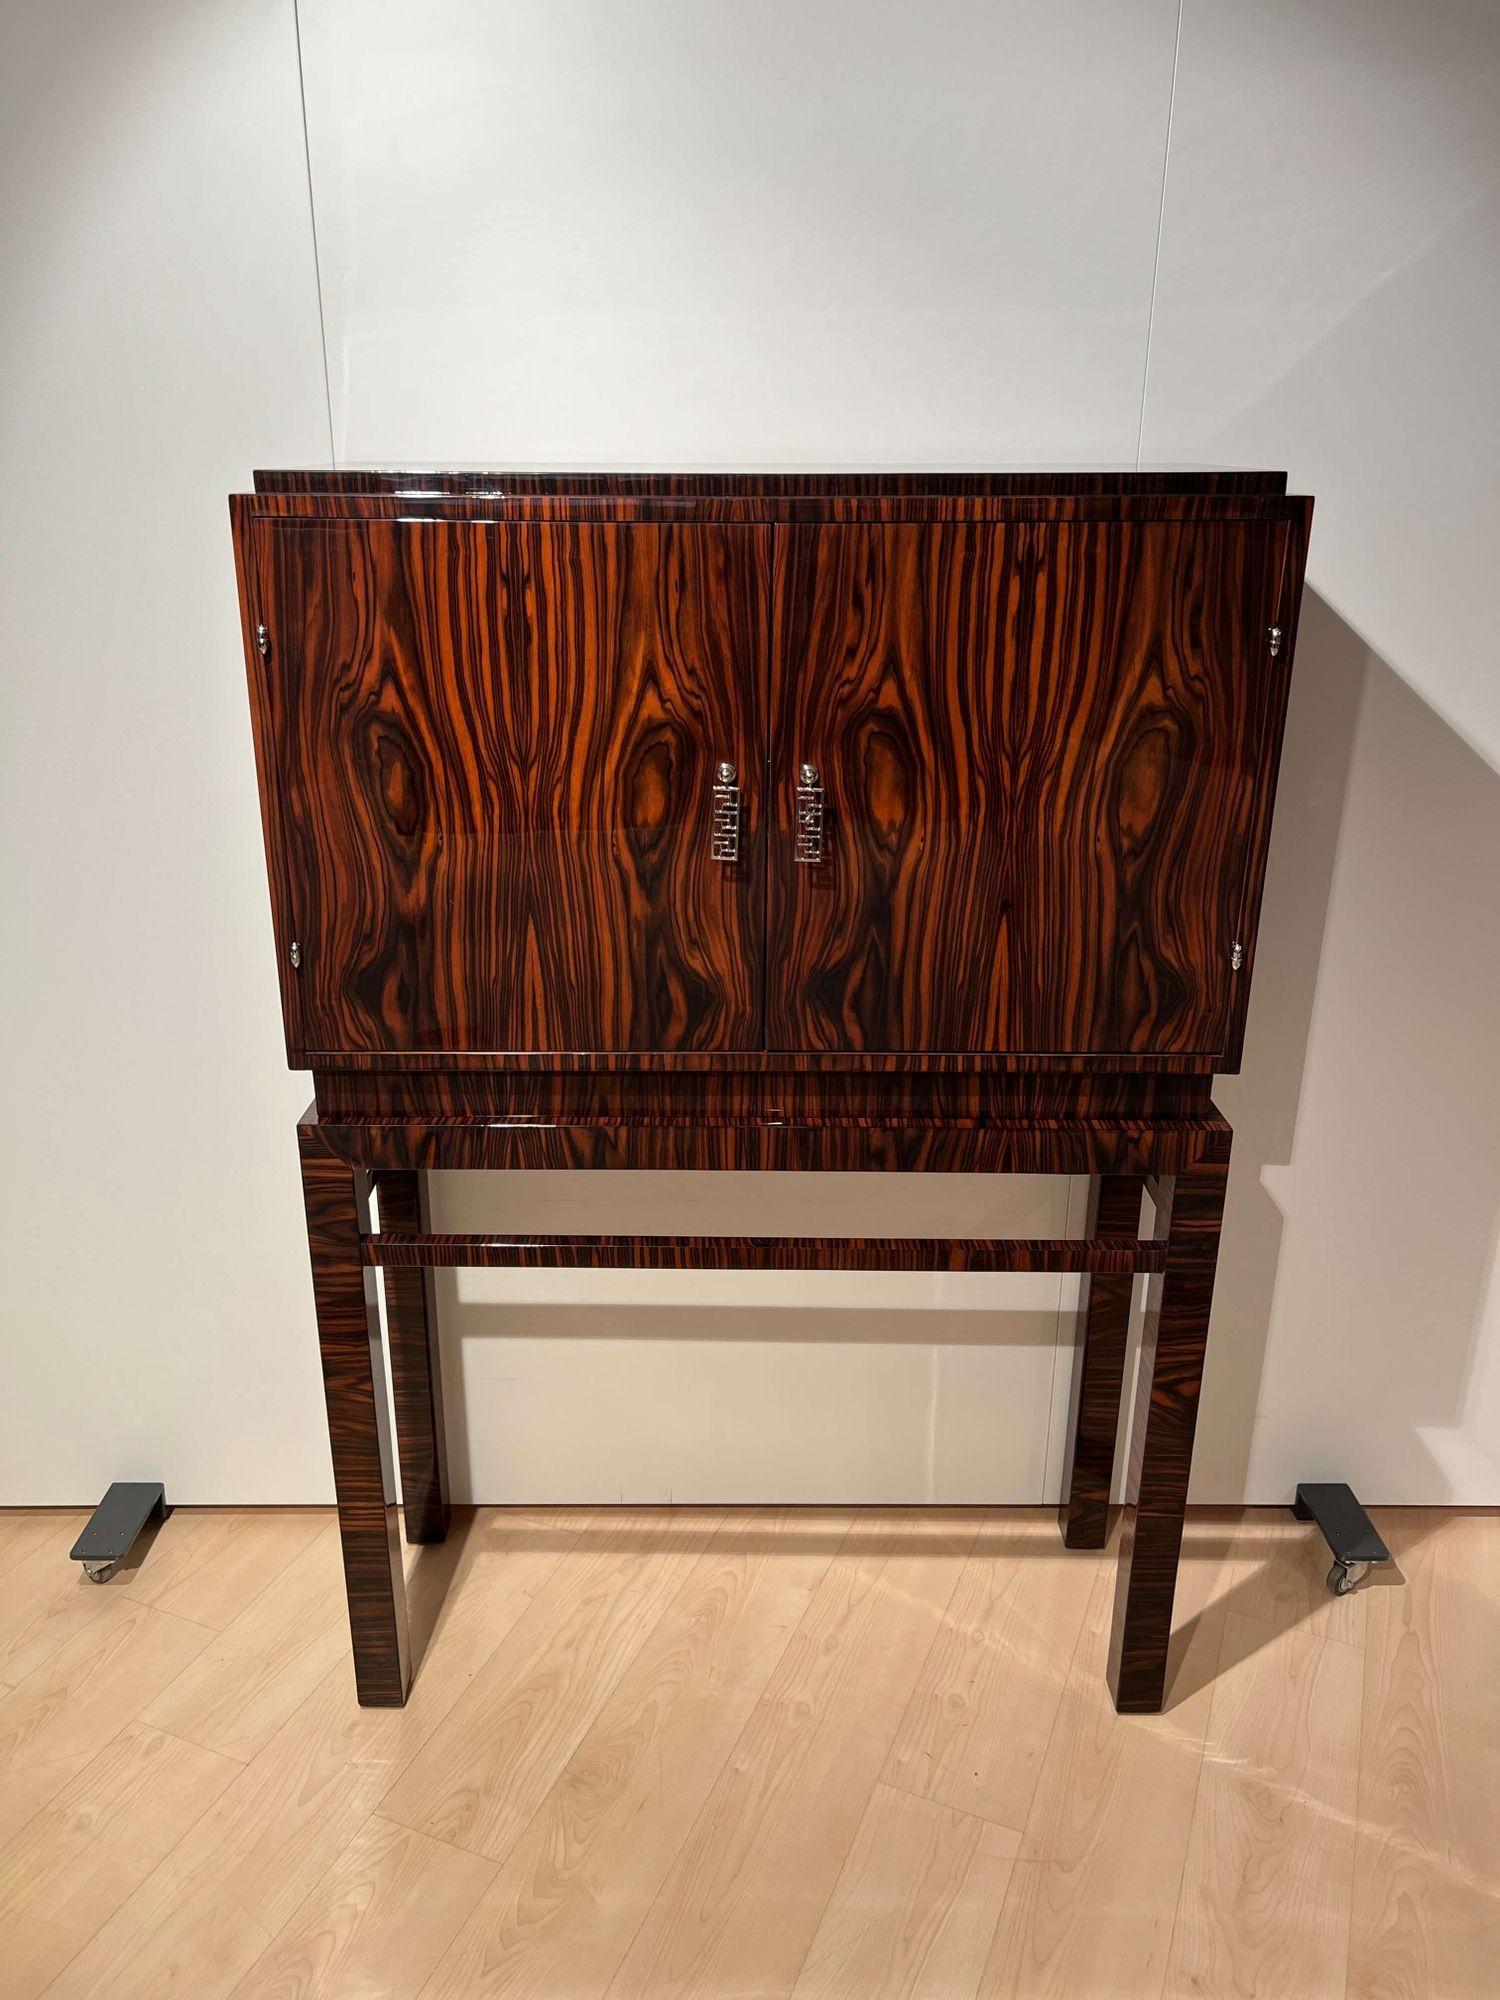 High Art Deco Cabinet, Macassar Veneer, Mahogany, France circa 1930.
 
Beautiful book-matched Macassar ebony veneered. Excellently lacquered with clear piano lacquer and polished to high gloss.
Interior in mahogany with one shelf and 2 drawers.